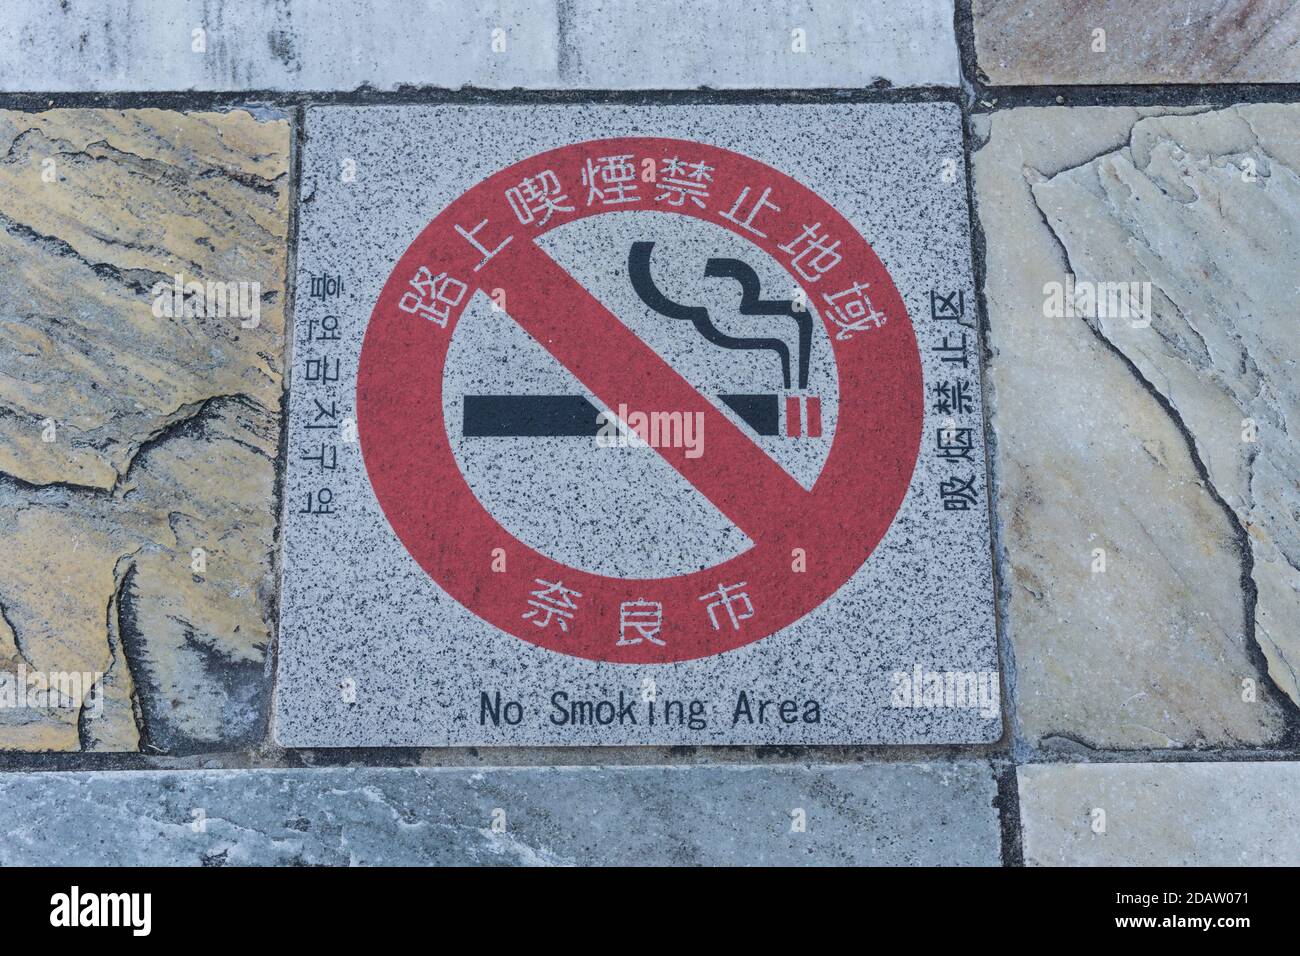 A sign indicating a no smoking area on a pavement on Sanjo Street in Nara, Japan Stock Photo